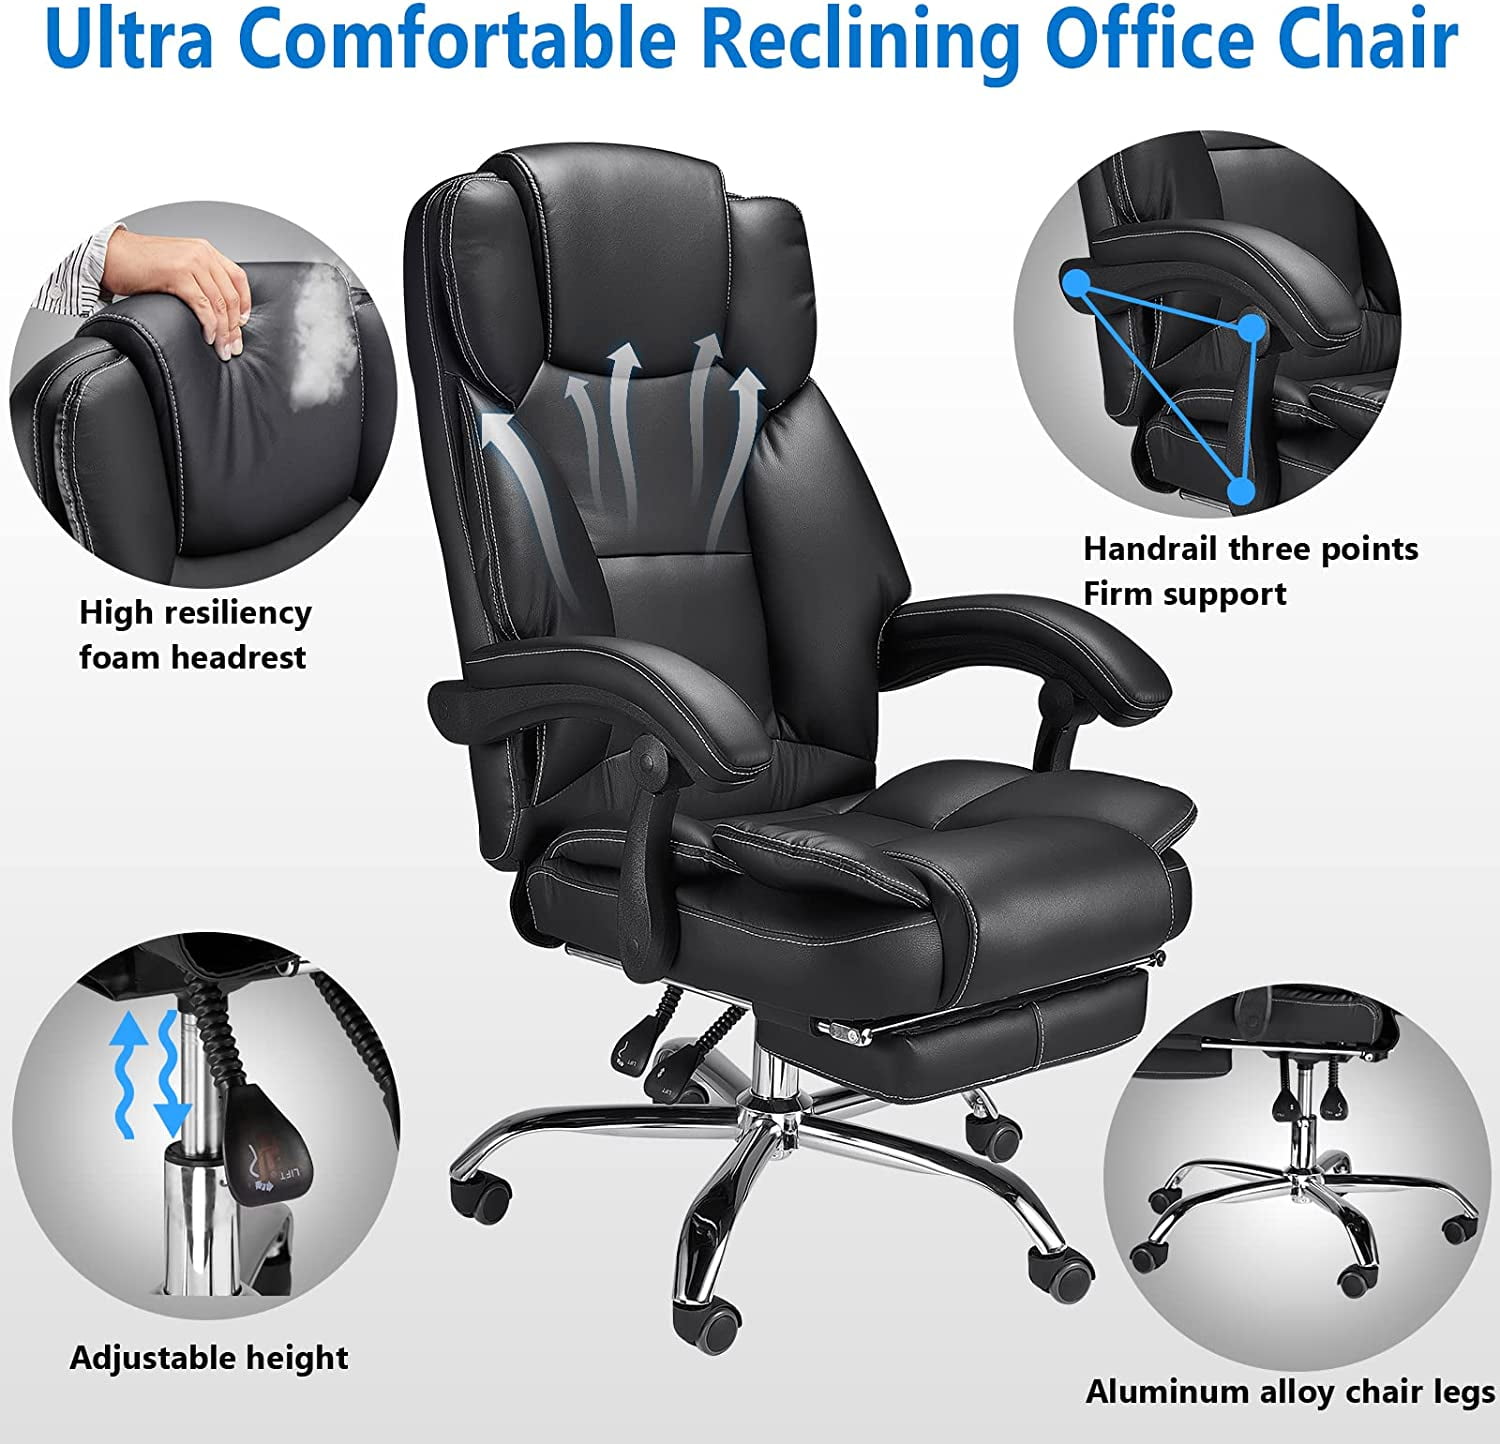 Cranbrook Big and Tall Ergonomic Reclining Executive Office Chair with Foot Rest Hokku Designs Upholstery Color: Brown/Black